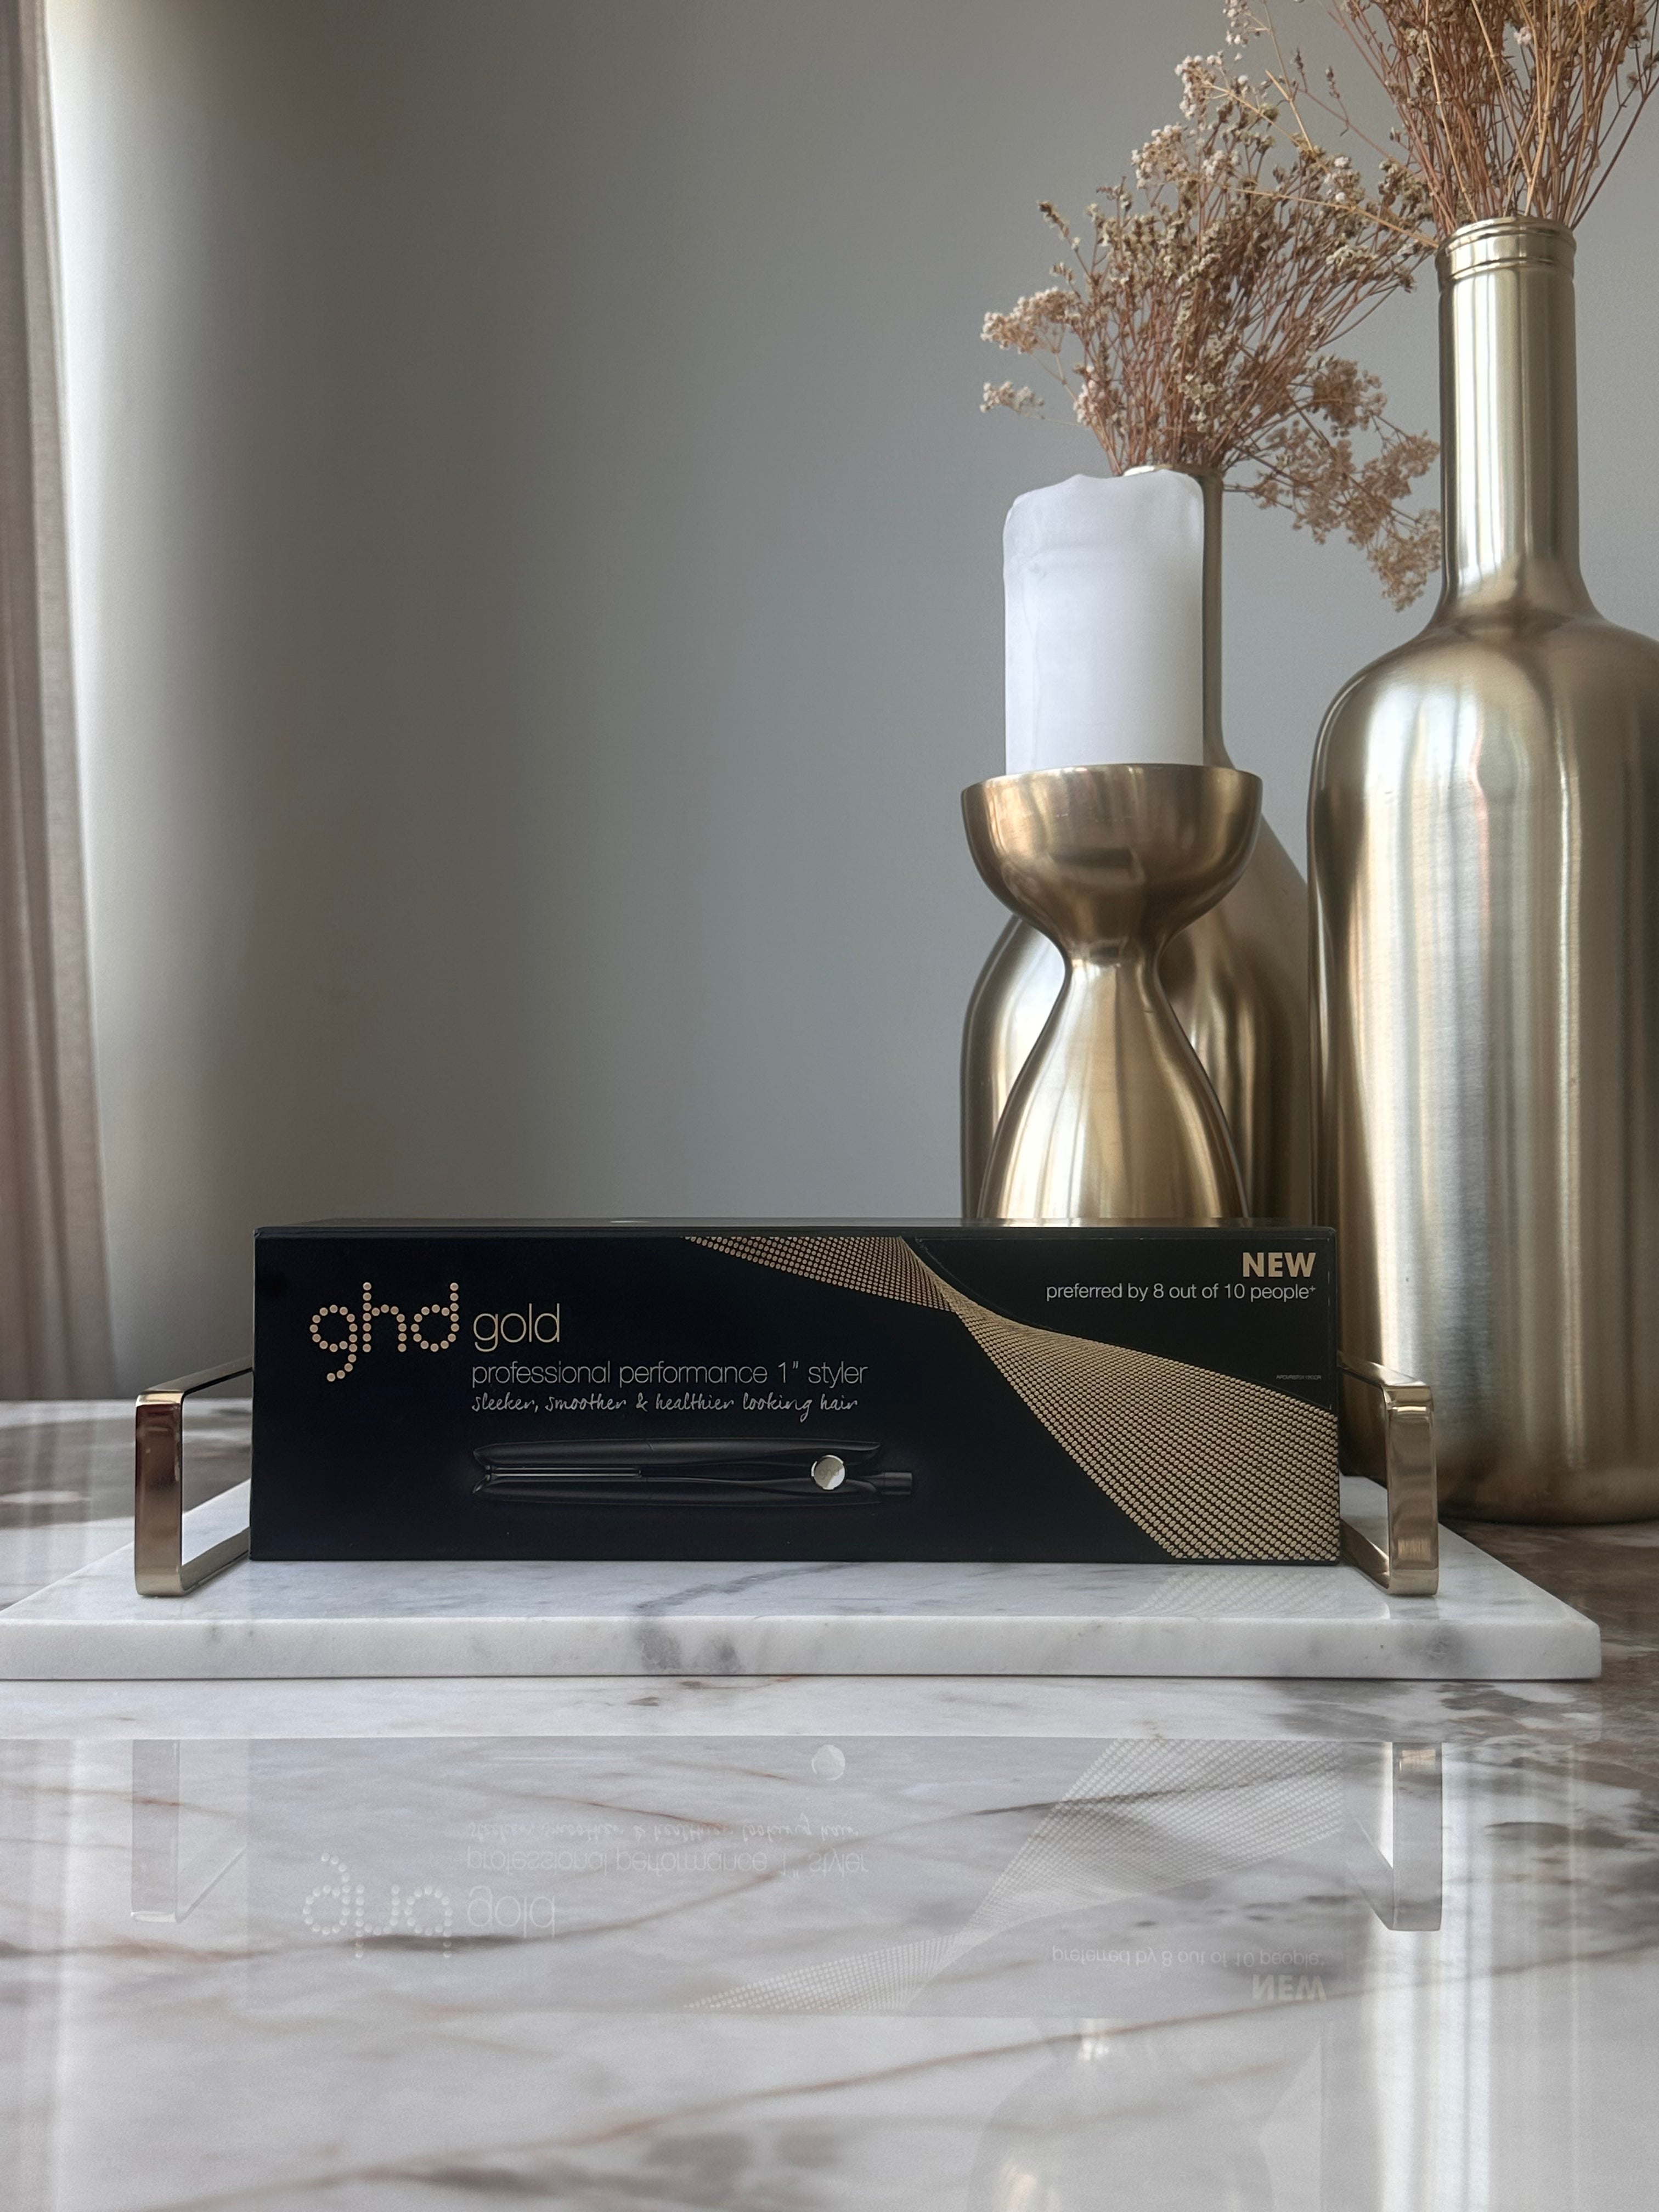 Brand New! ghd gold professional hair styler - sleeker,smoother & healthier looking hair